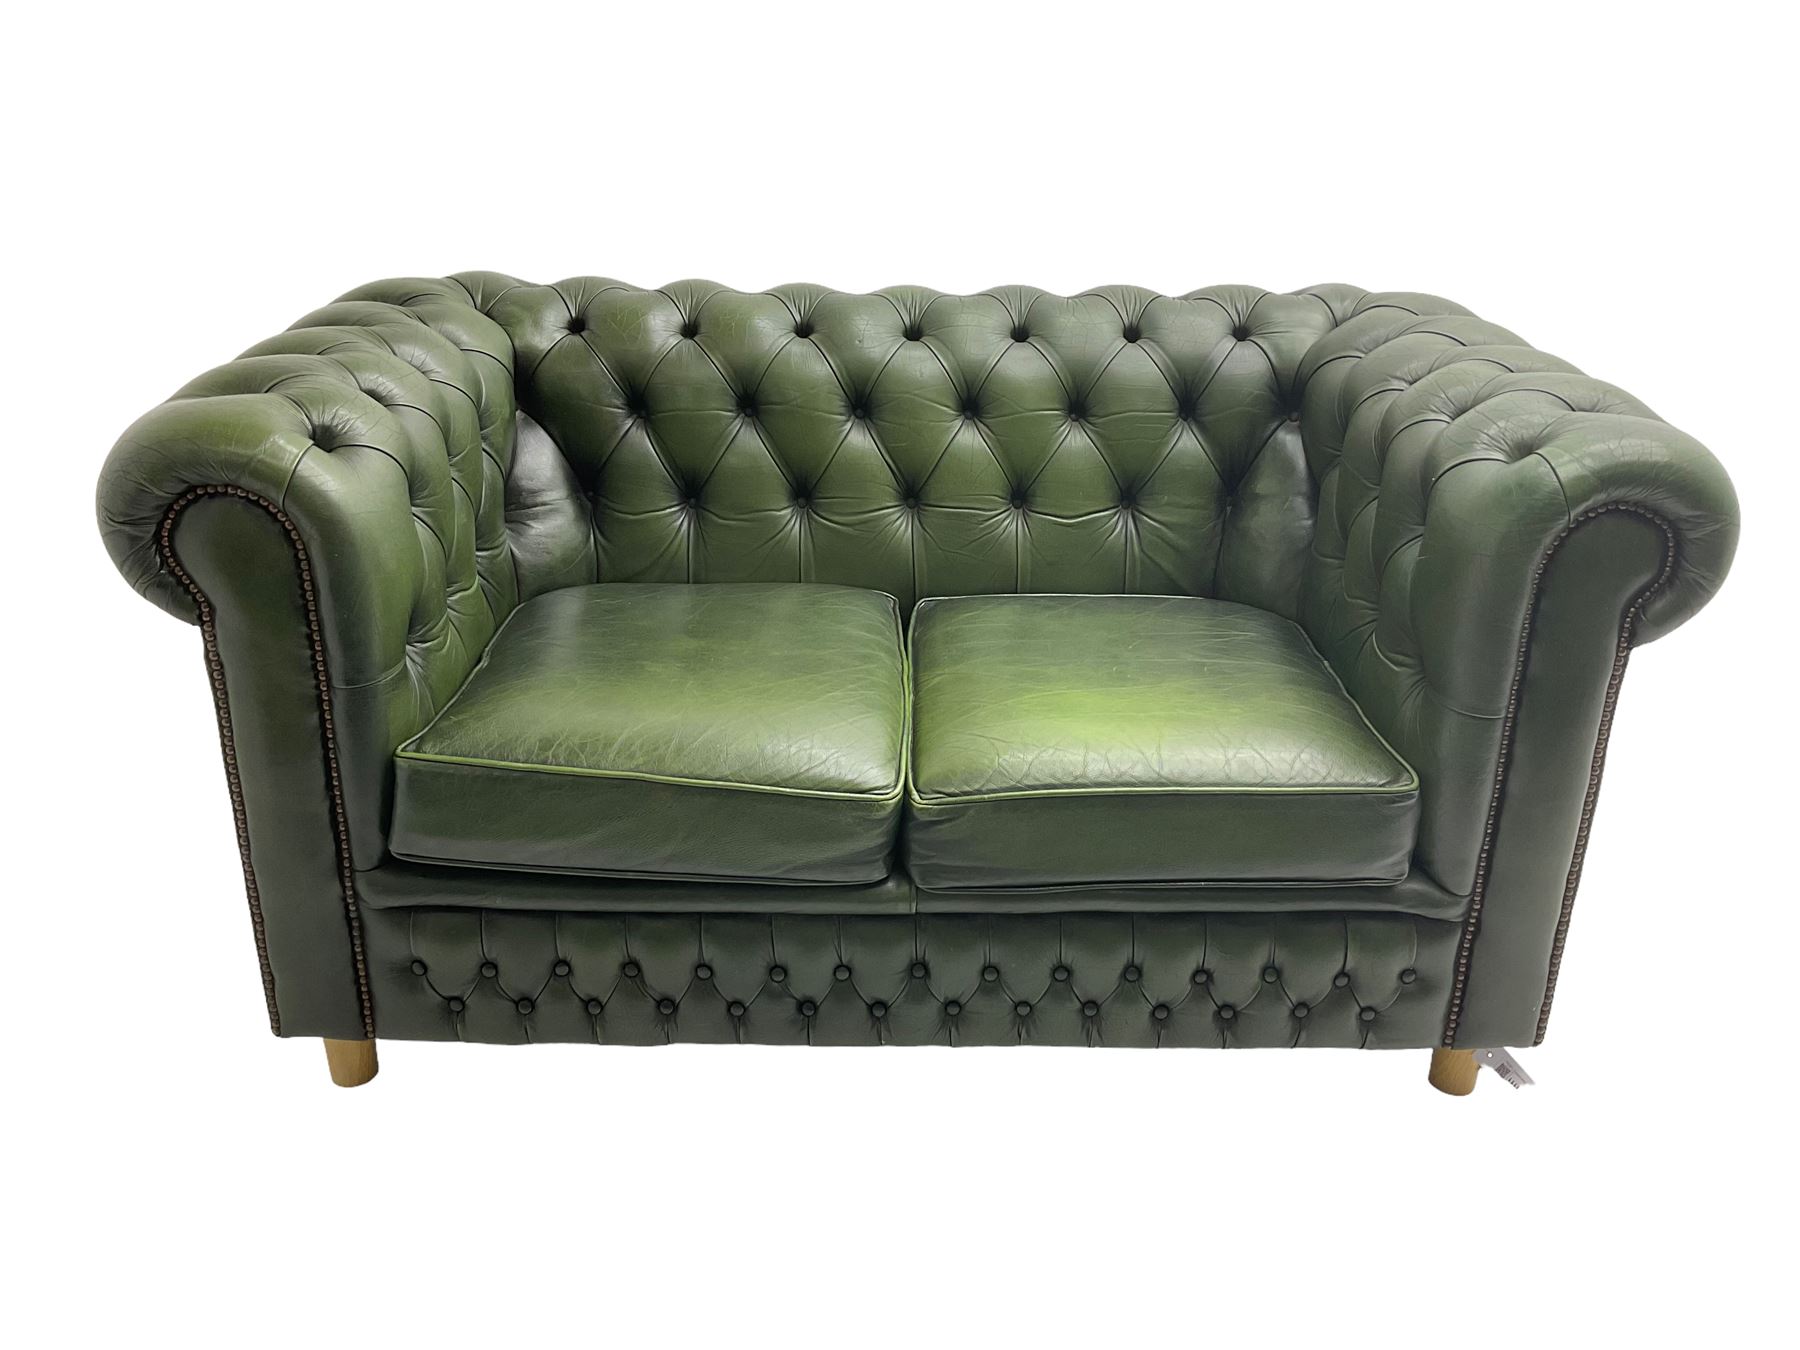 Chesterfield style two seat sofa upholstered in buttoned green leather with stud work